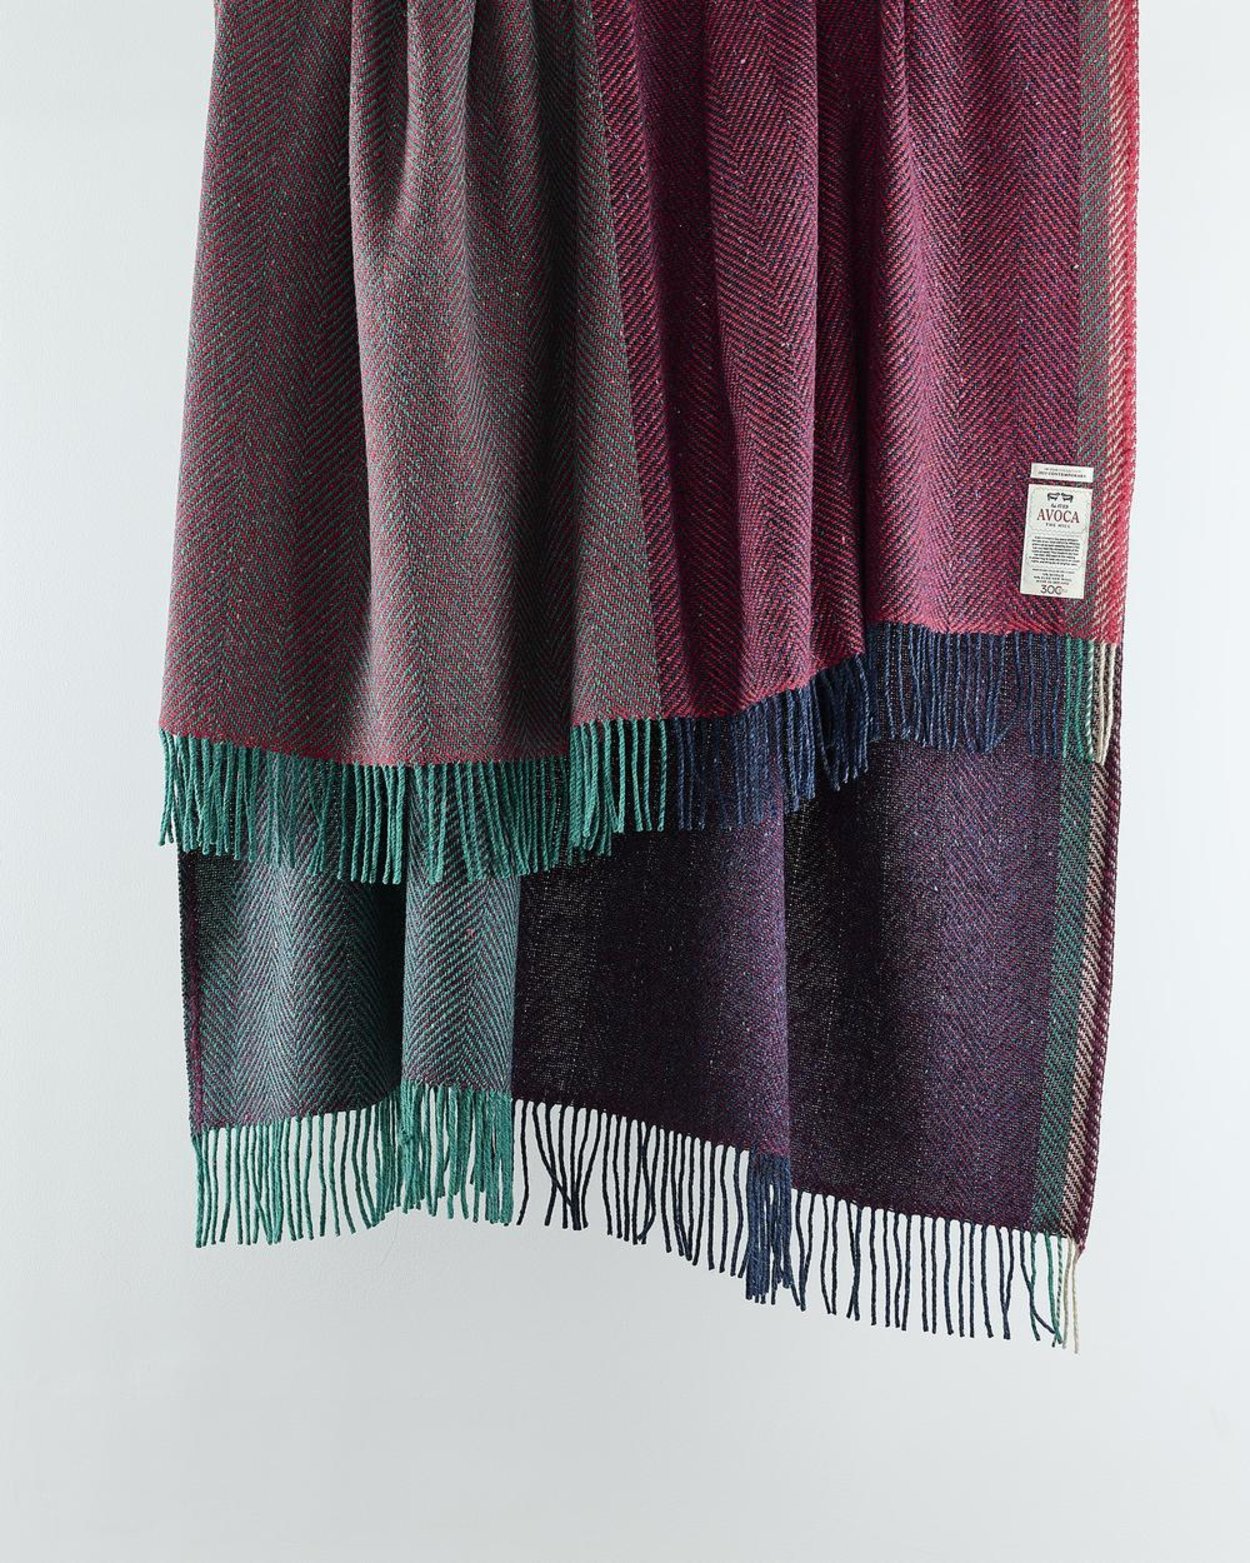 Contemporary Mohair Tweed Throw | Woven in our Mill | Avoca®